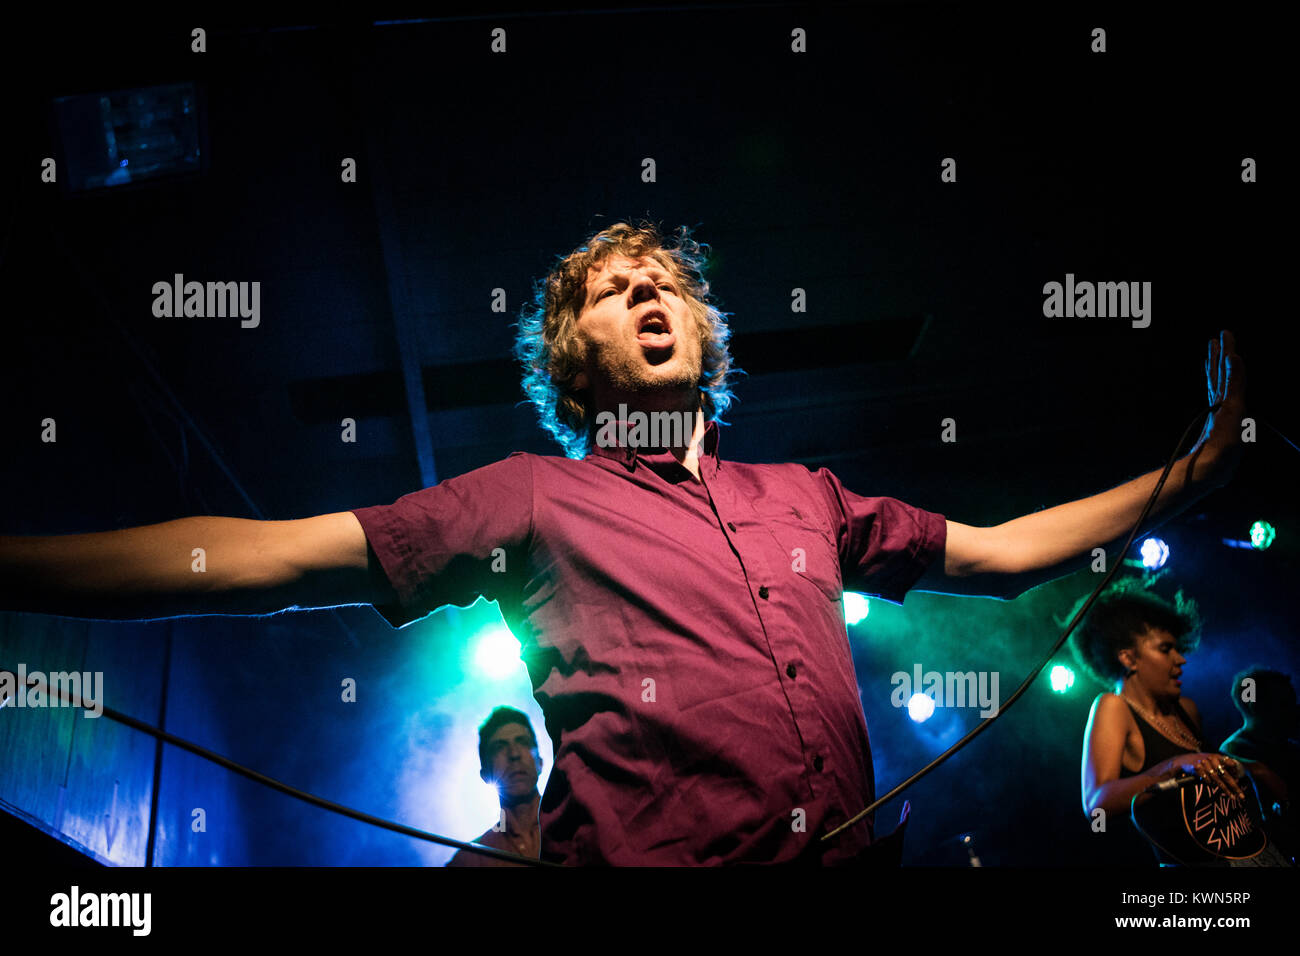 The American dance-punk band !!! (chk chk chk) performs a live concert at VEGA in Copenhagen. Here singer and songwriter Nic Offer is seen live on stage. Denmark, 27/05 2017. Stock Photo